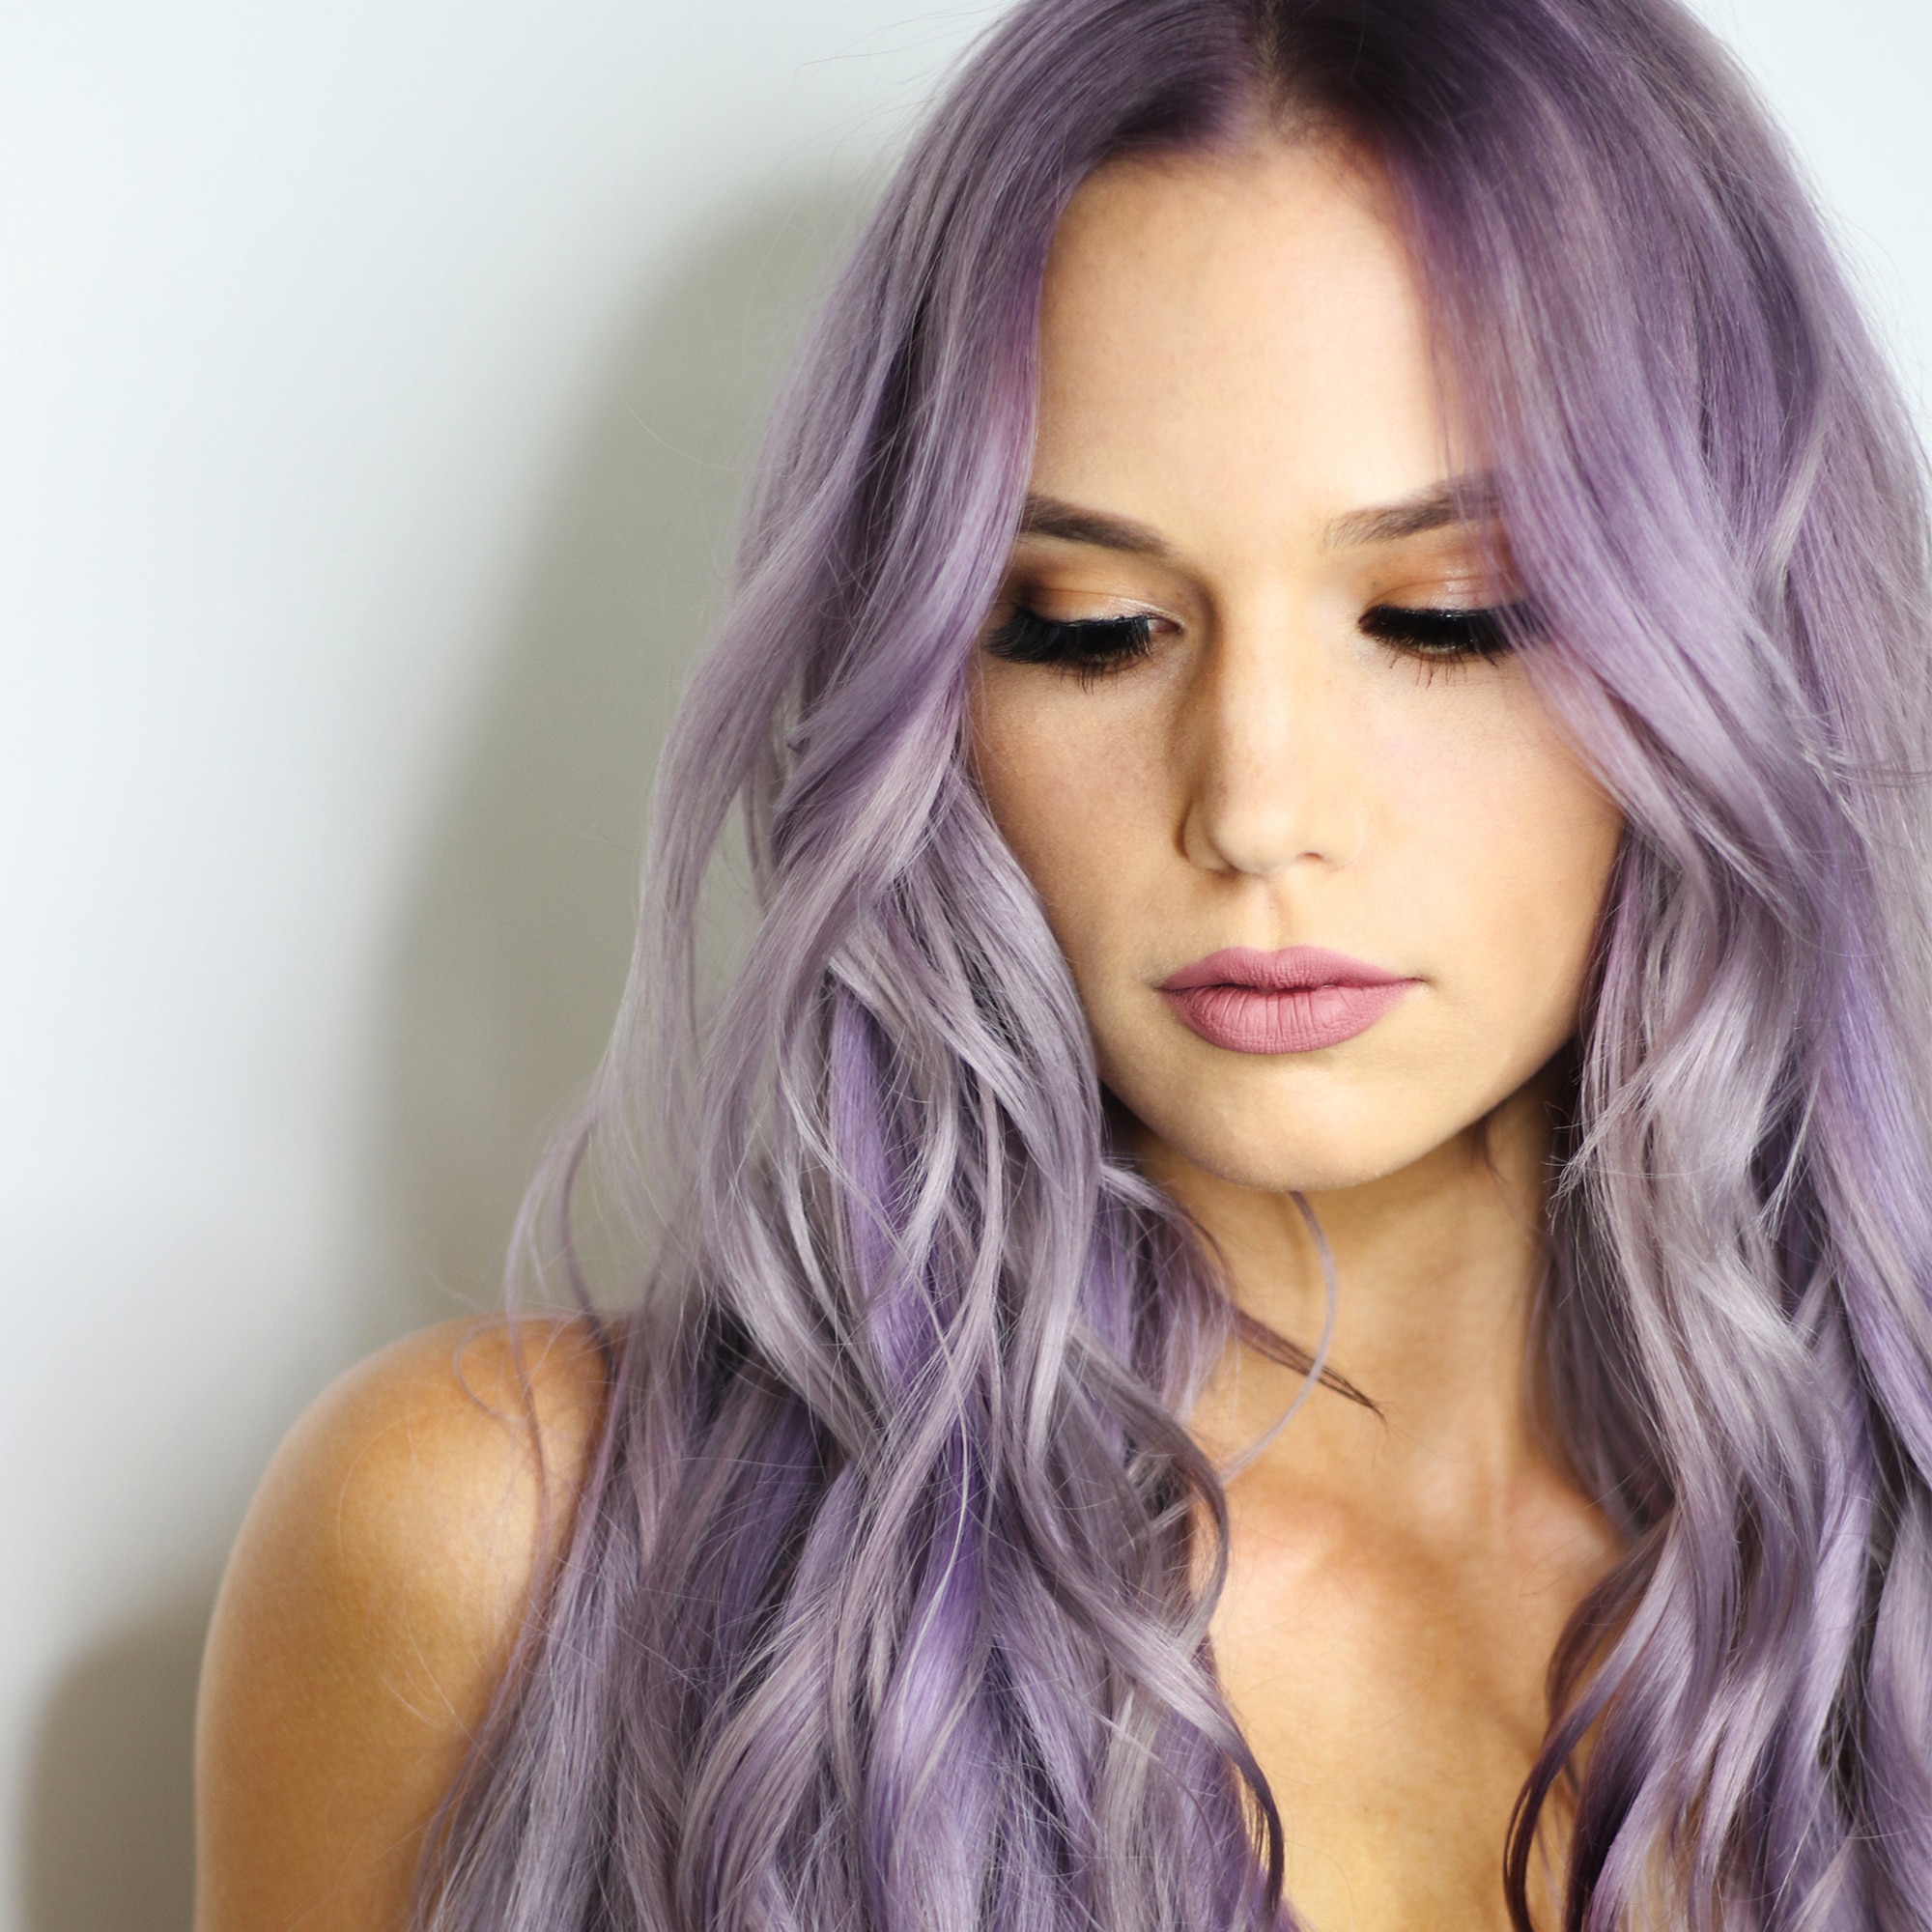 How To Care For Colored Hair